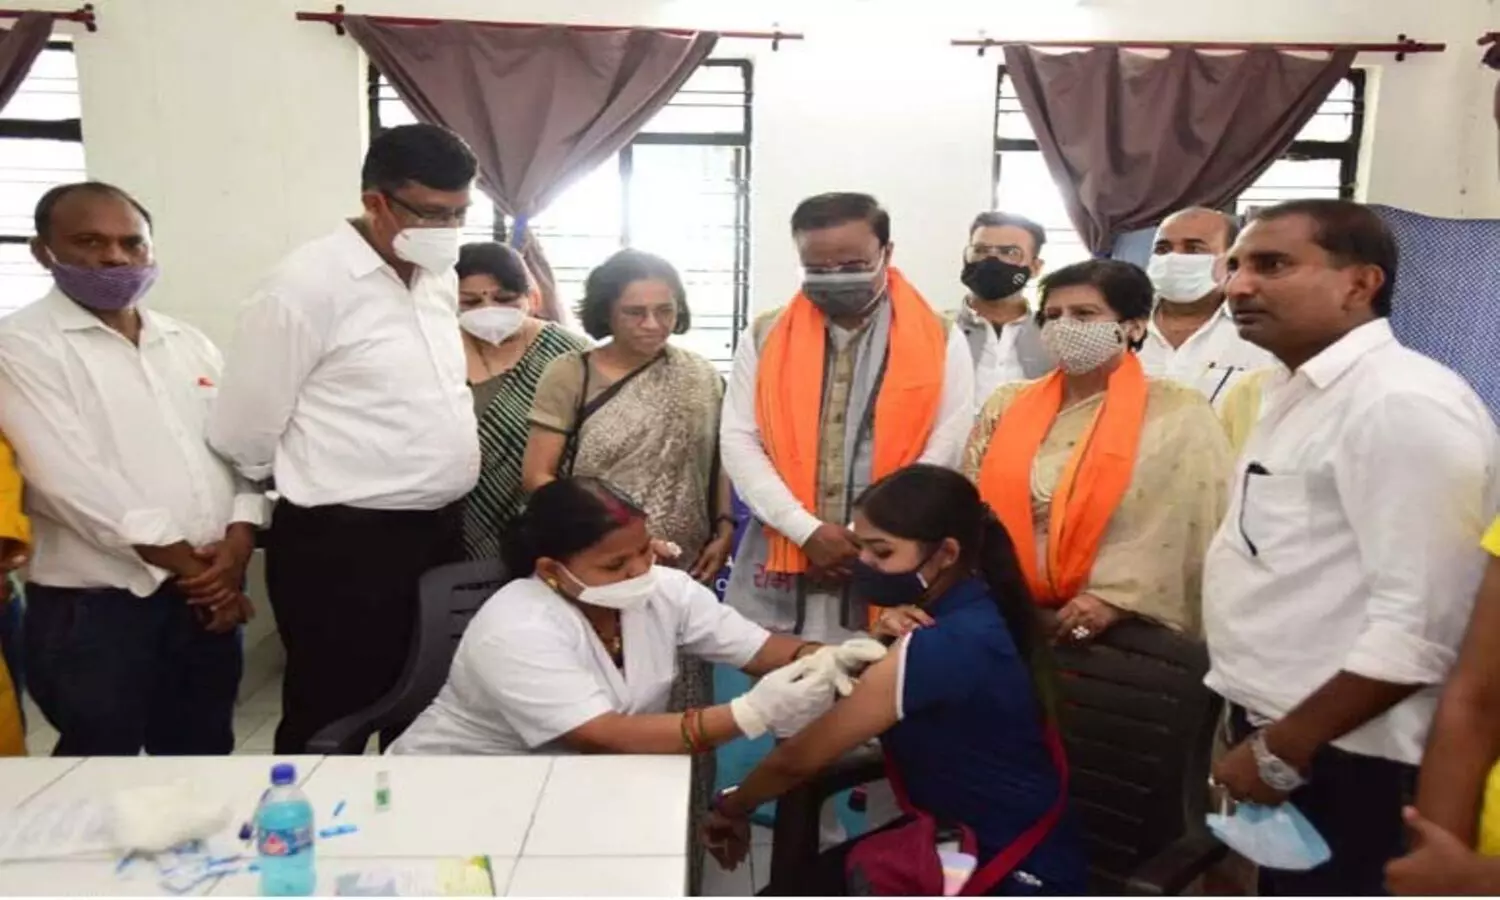 COVID-19 vaccination camps set up in several CMS, Lucknow campuses